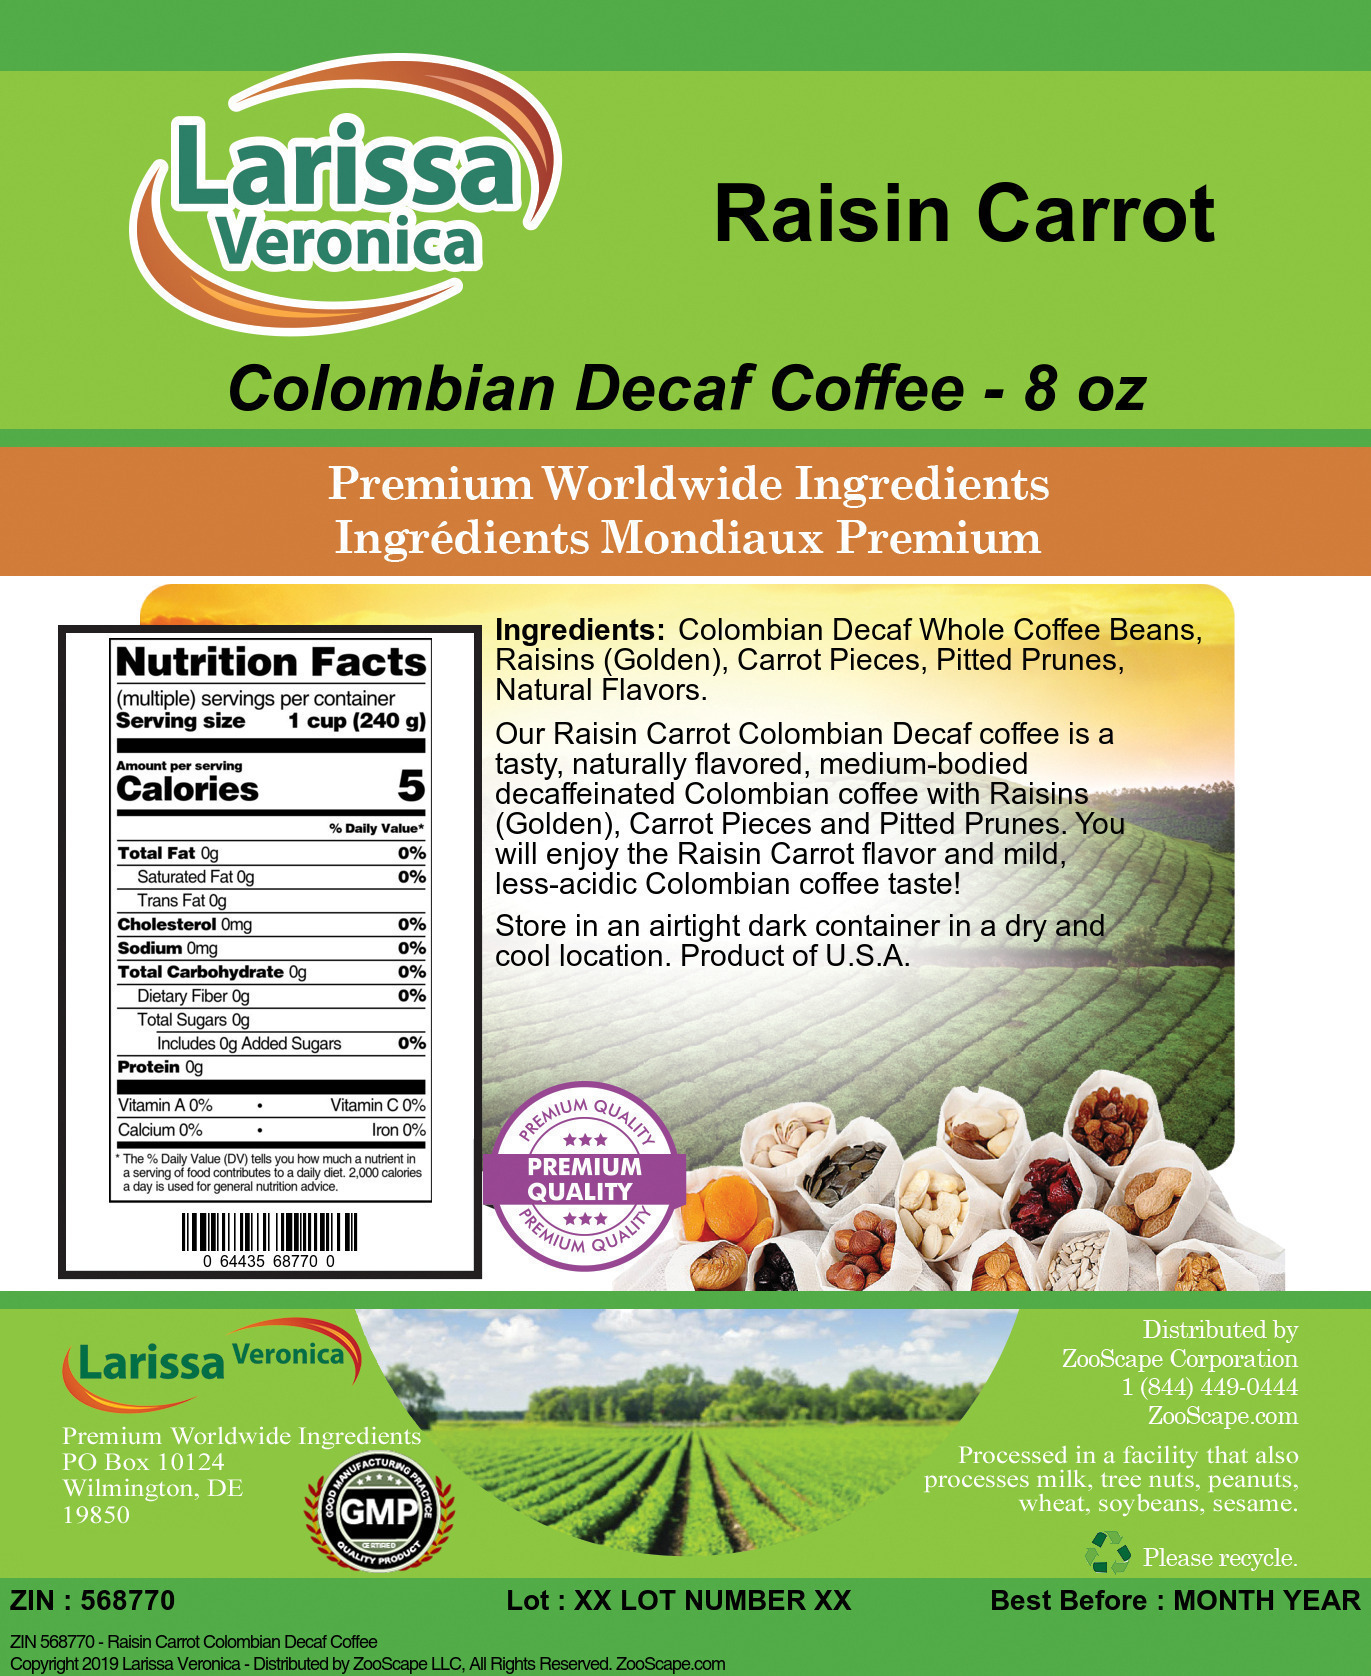 Raisin Carrot Colombian Decaf Coffee - Label